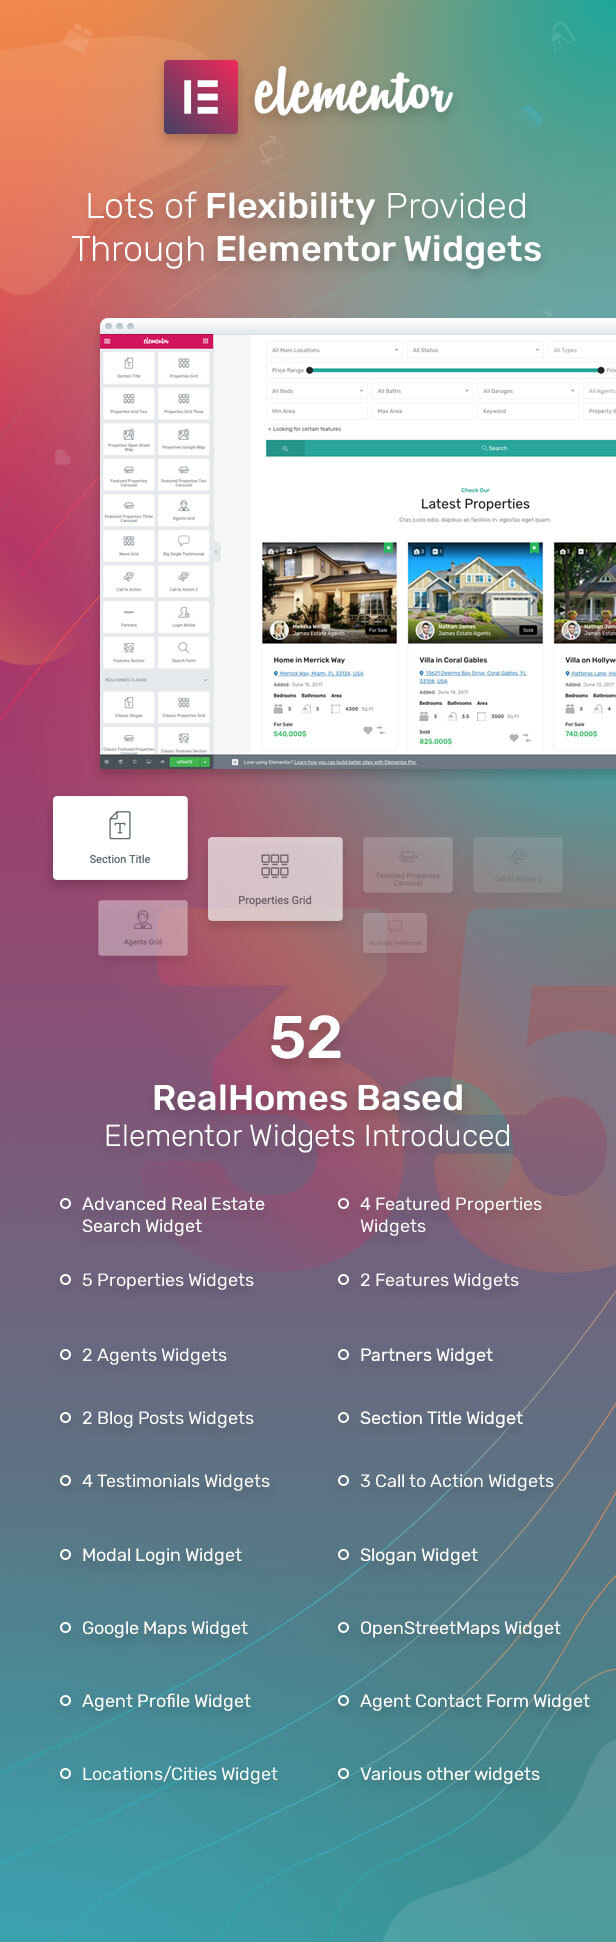 52 RealHomes Based Elementor Widgets Introduced